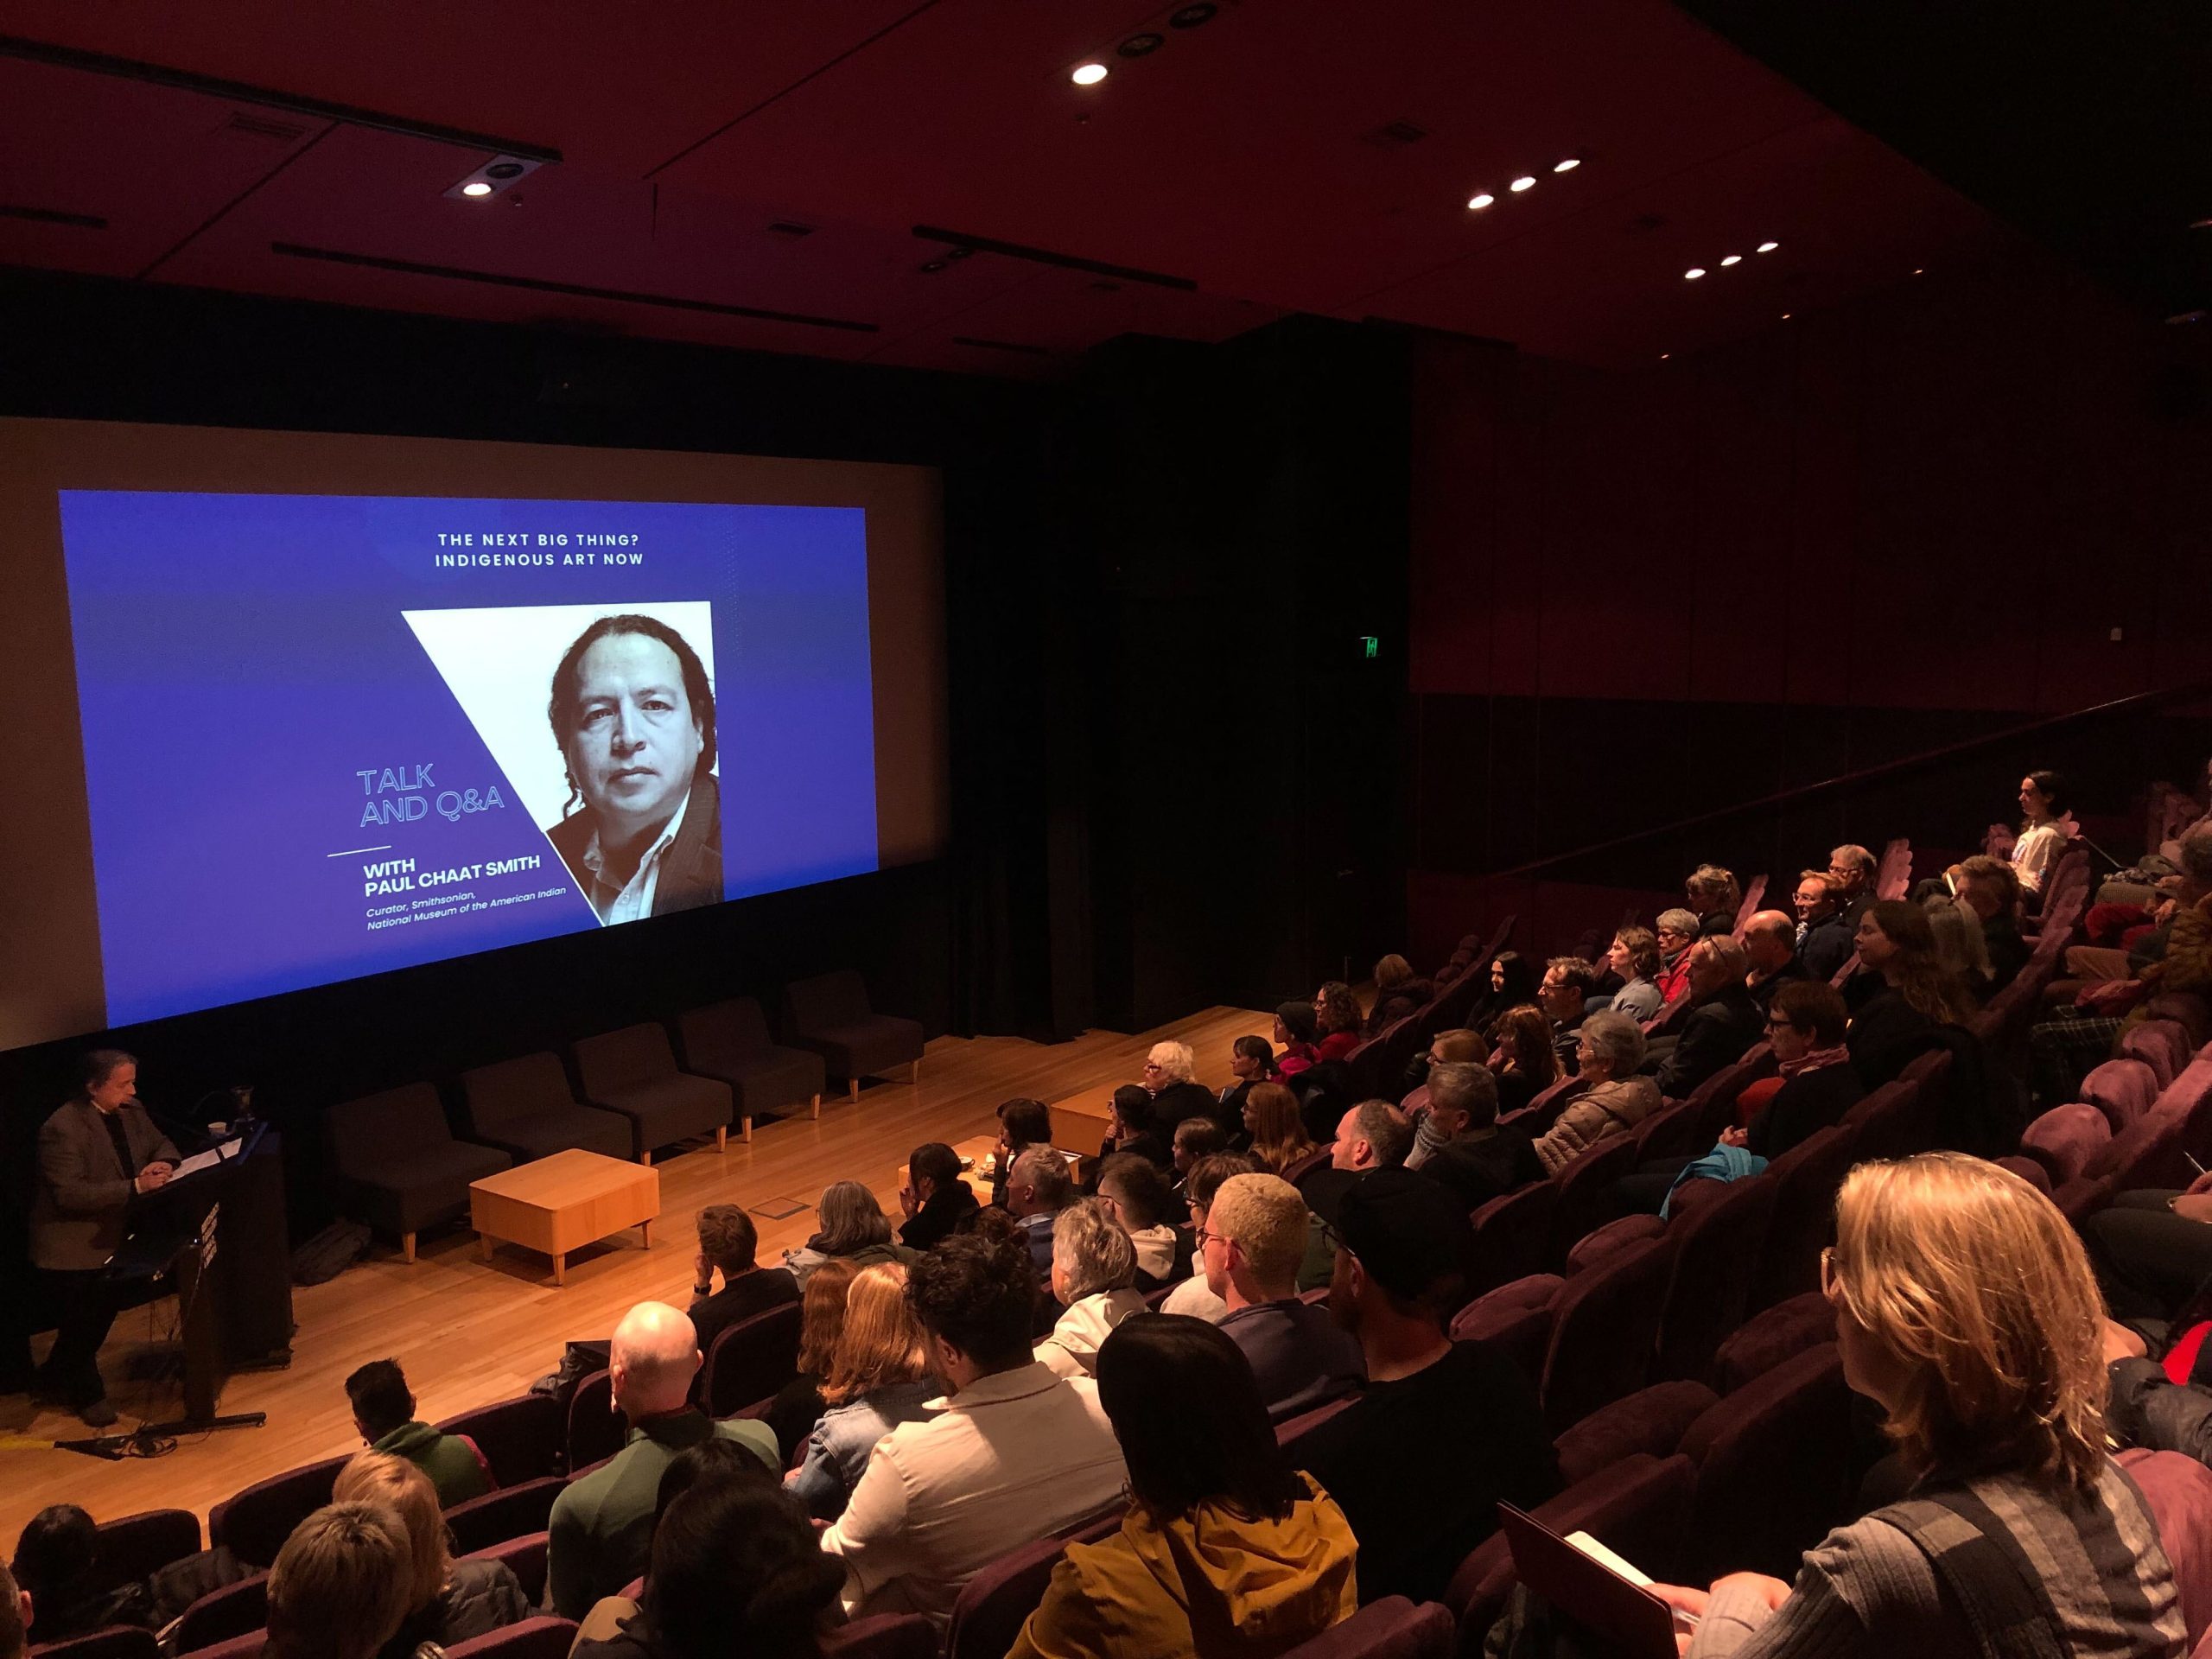 Smith gave a public talk followed by a question and answer session at Christchurch Art Gallery Te Puna o Waiwhetū.